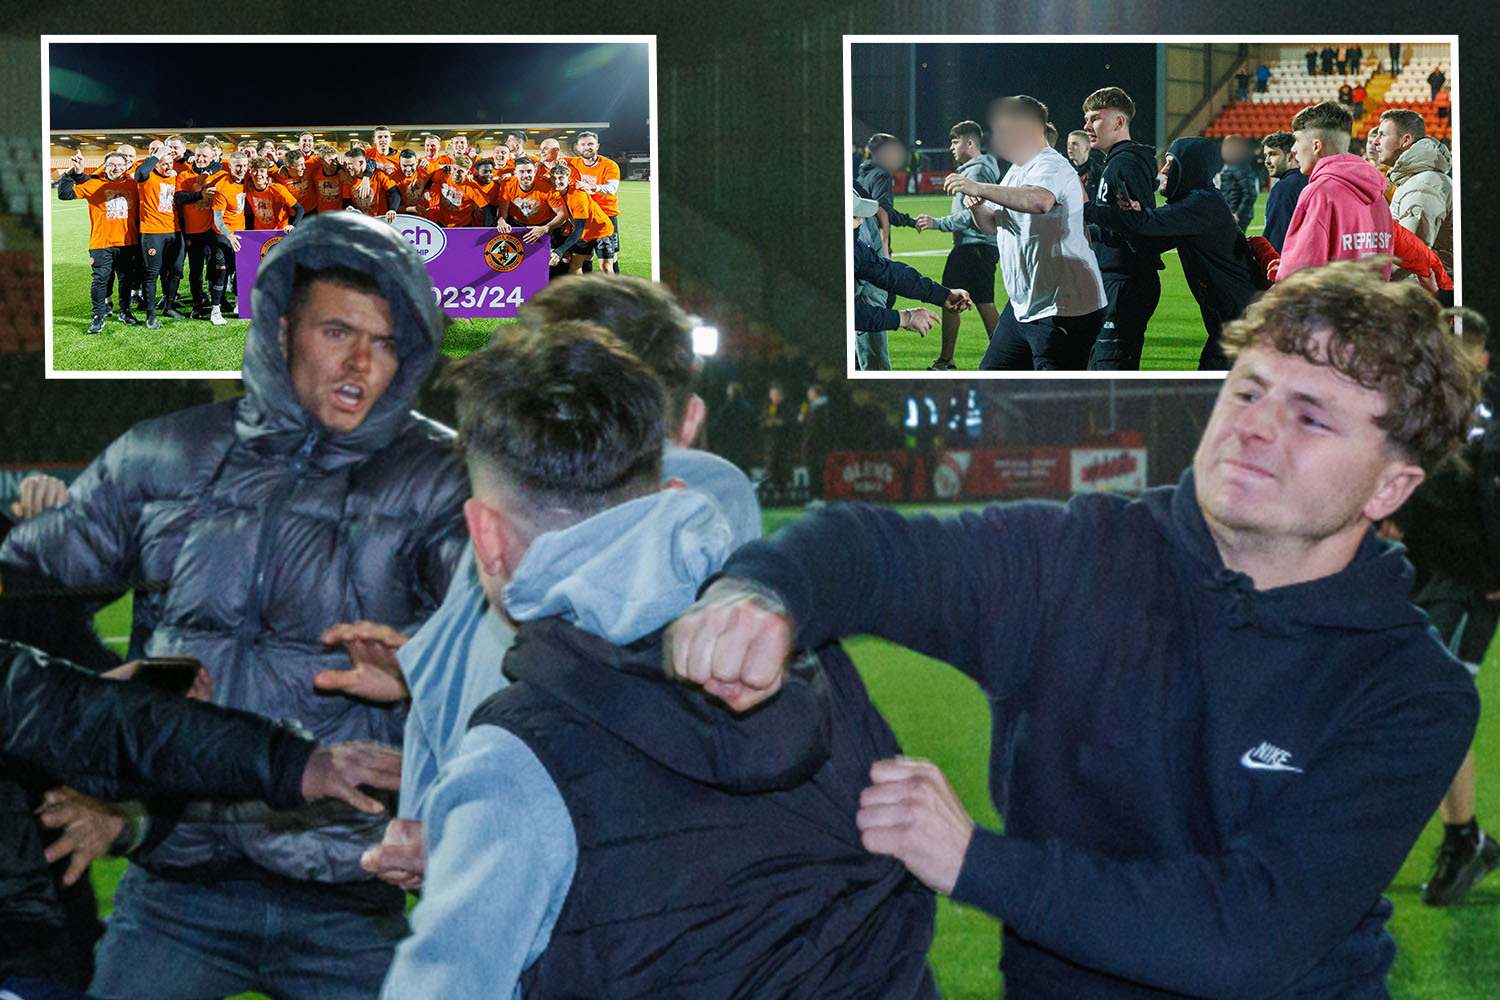 Shock images show Dundee Utd and Airdrie fans exchanging punches on field